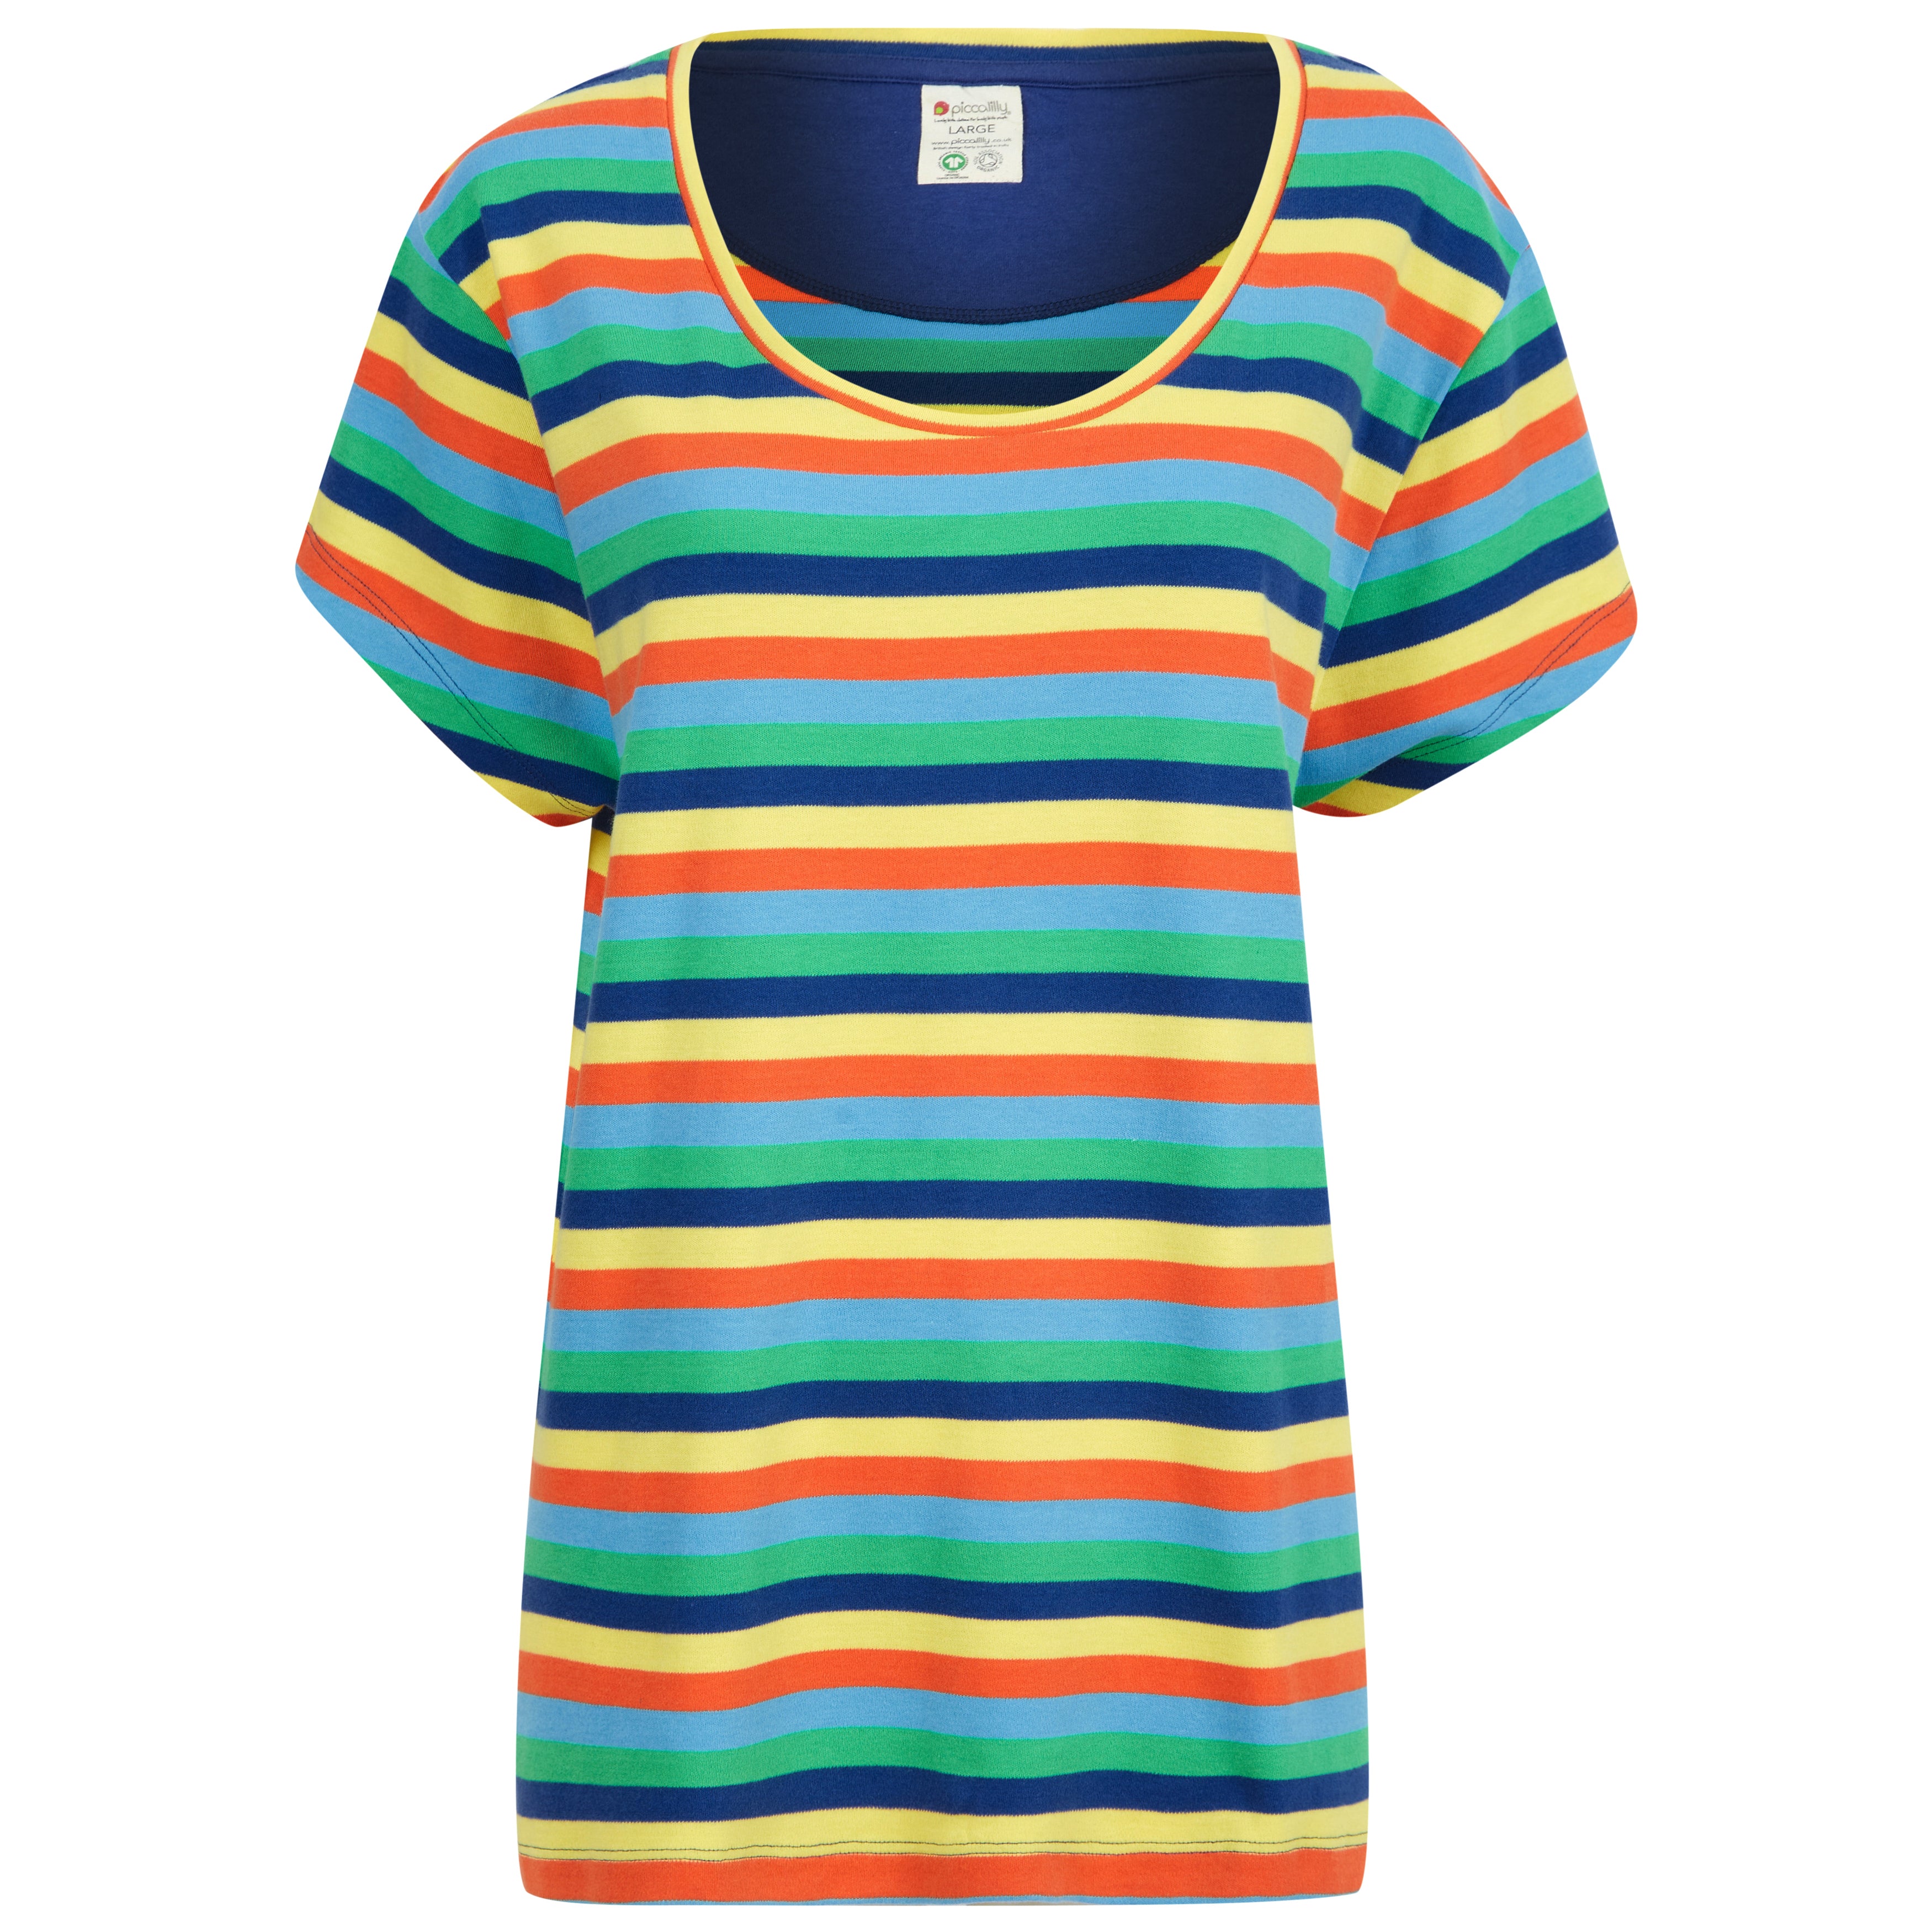 Piccalilly T-shirt Rainbow Stripe (Adult - Women's)